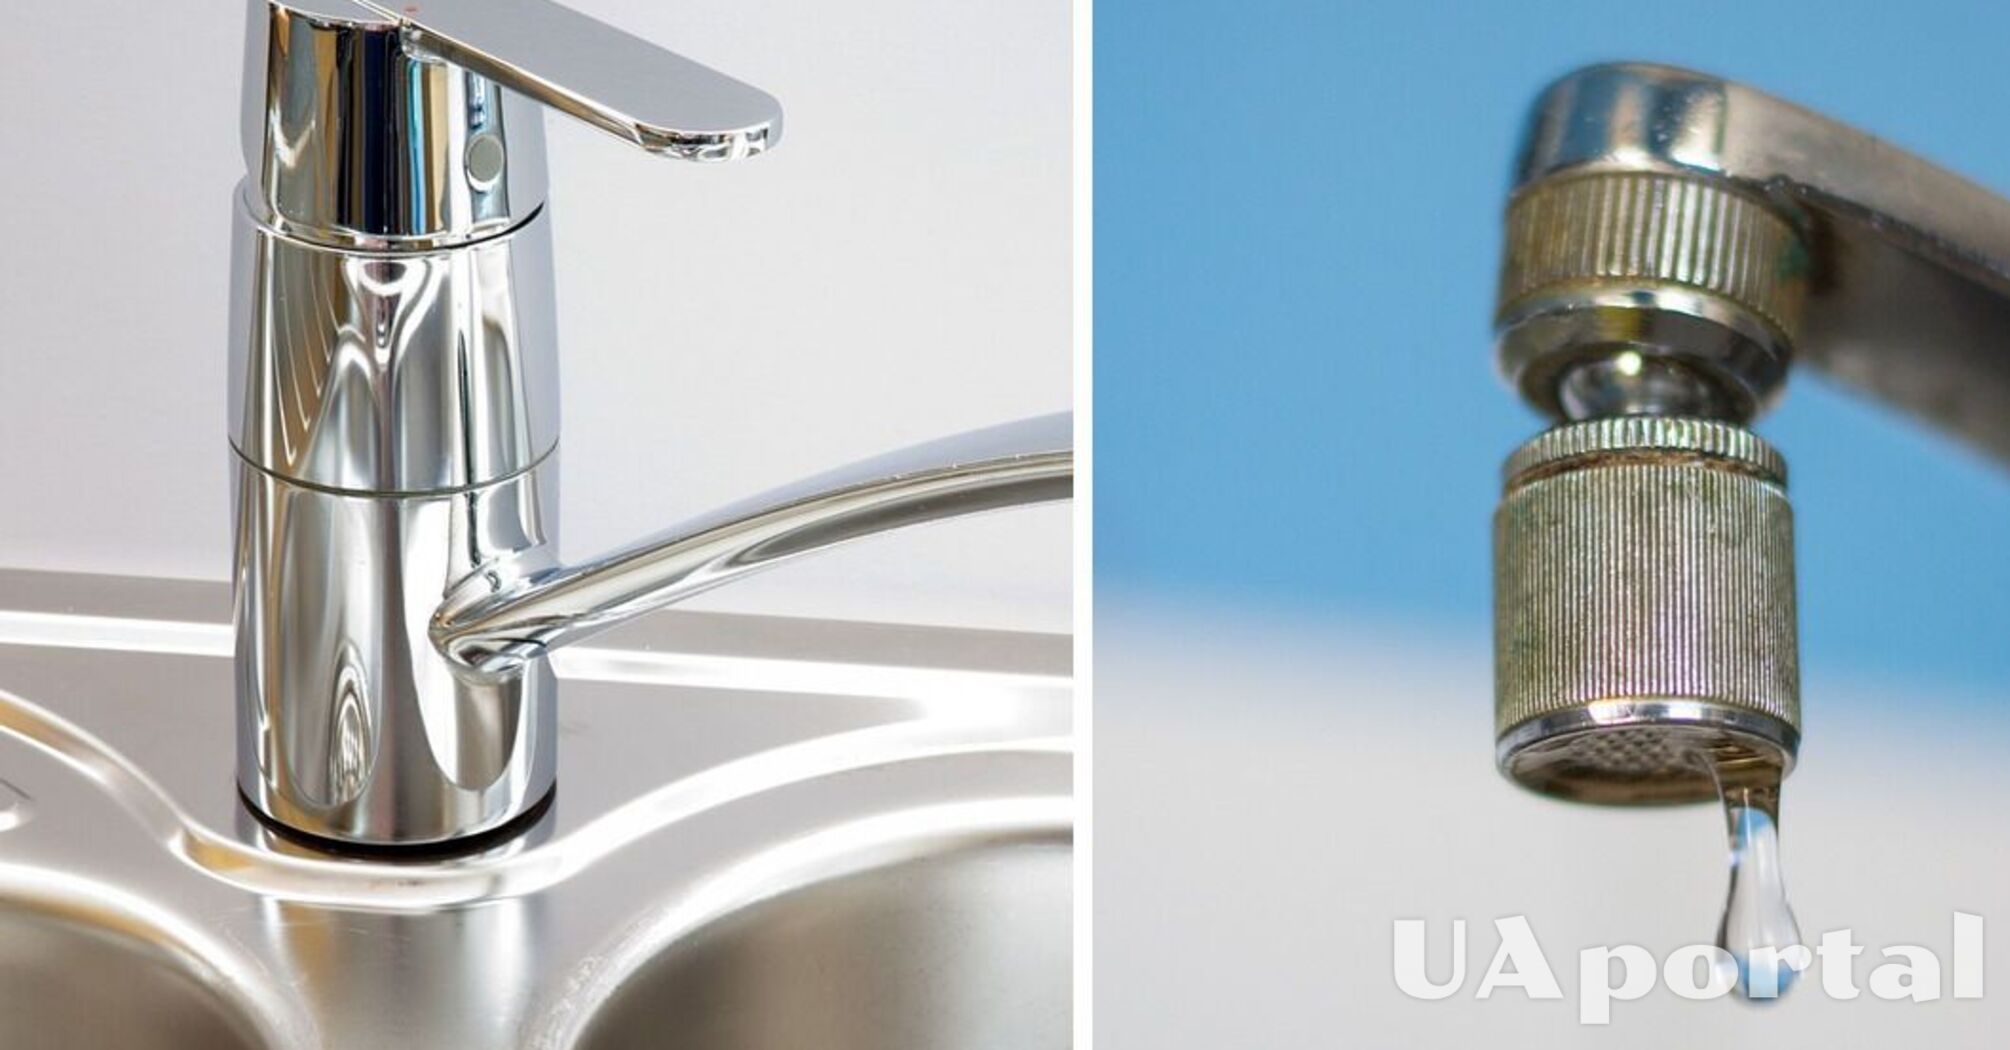 Experts tell you how to get rid of limescale on your bathroom faucet cheaply: it will shine like new